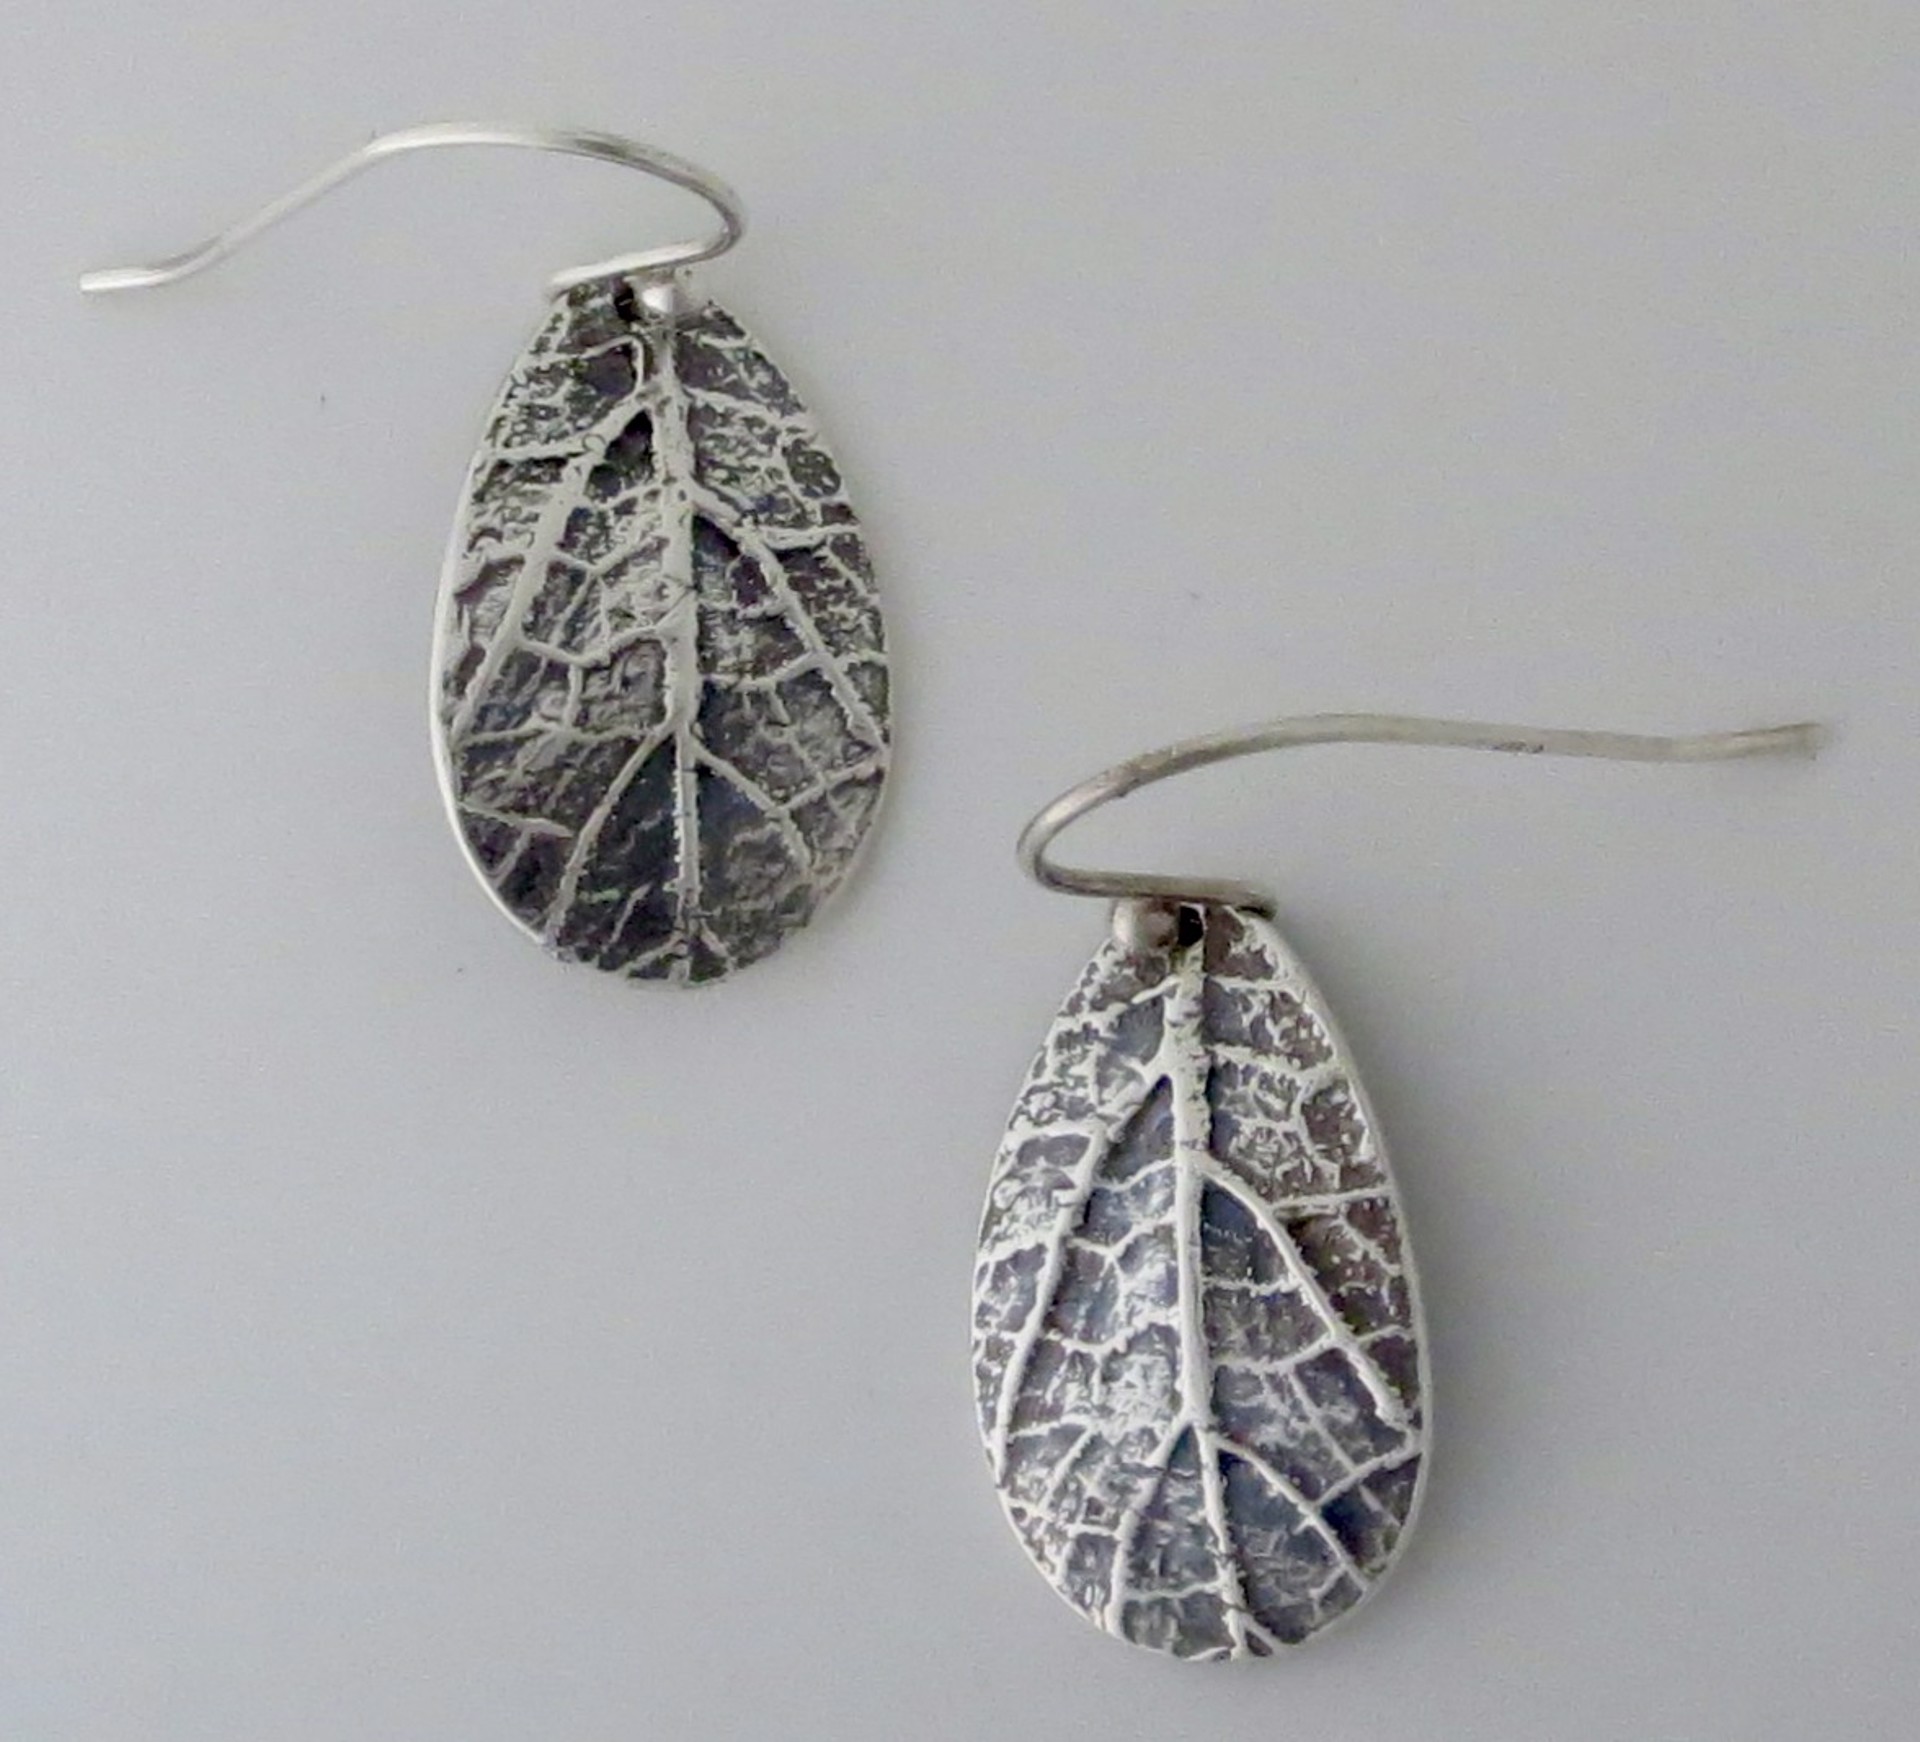 M-969 Leaf Earrings by Donna Rittorno